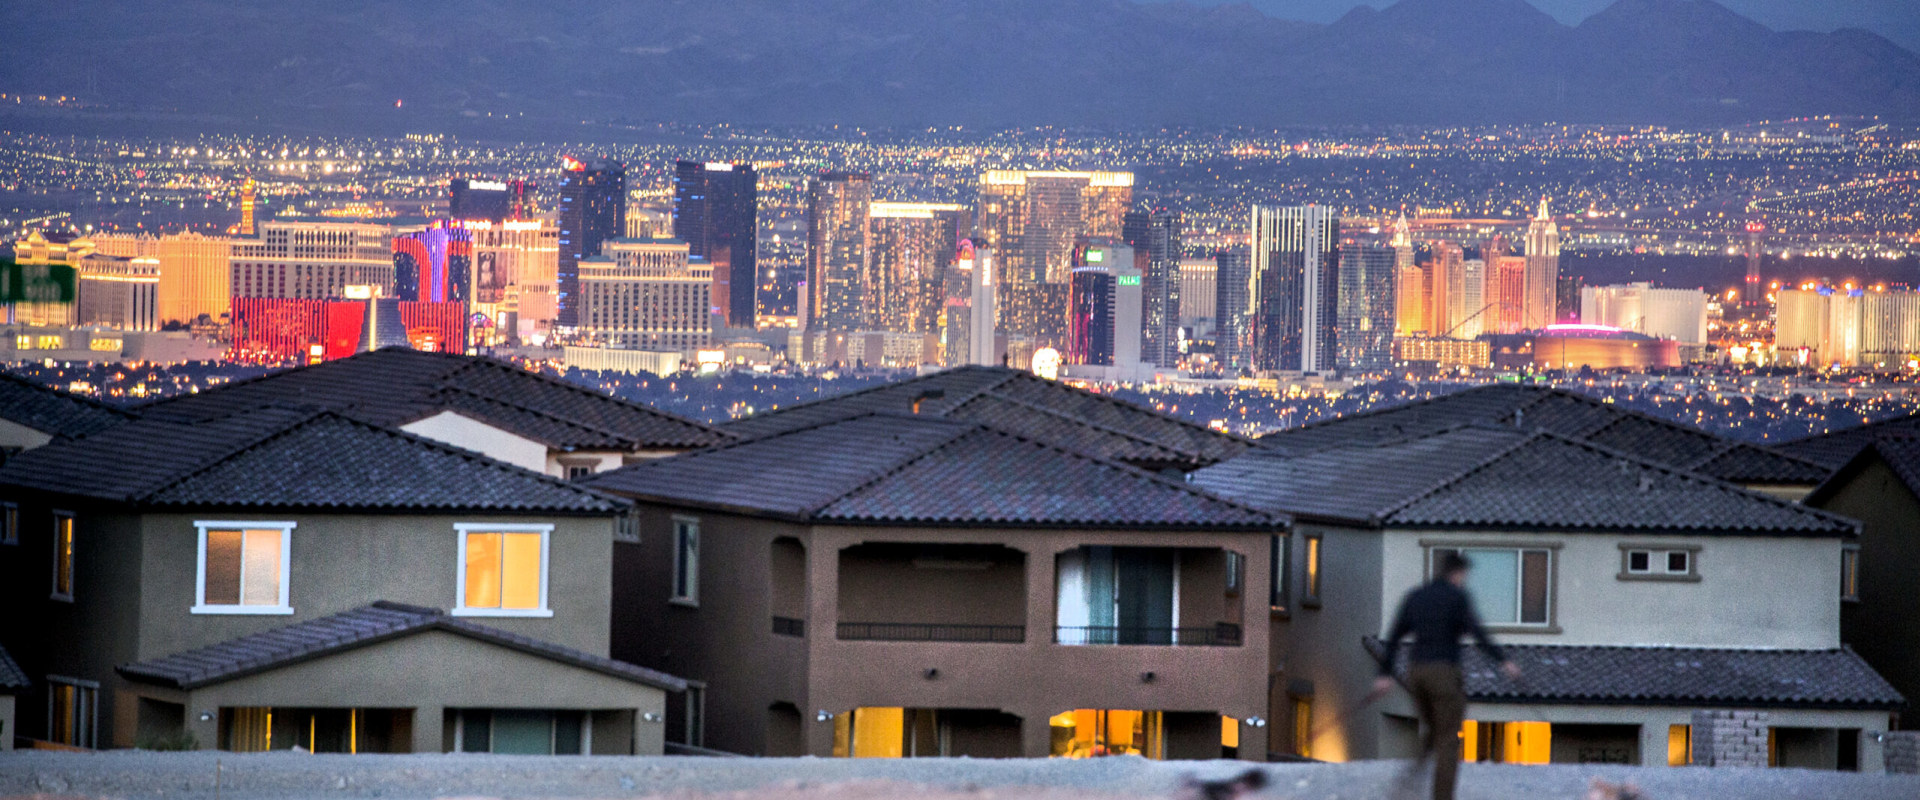 Finding the Right Project Insurance Options in Las Vegas, Nevada